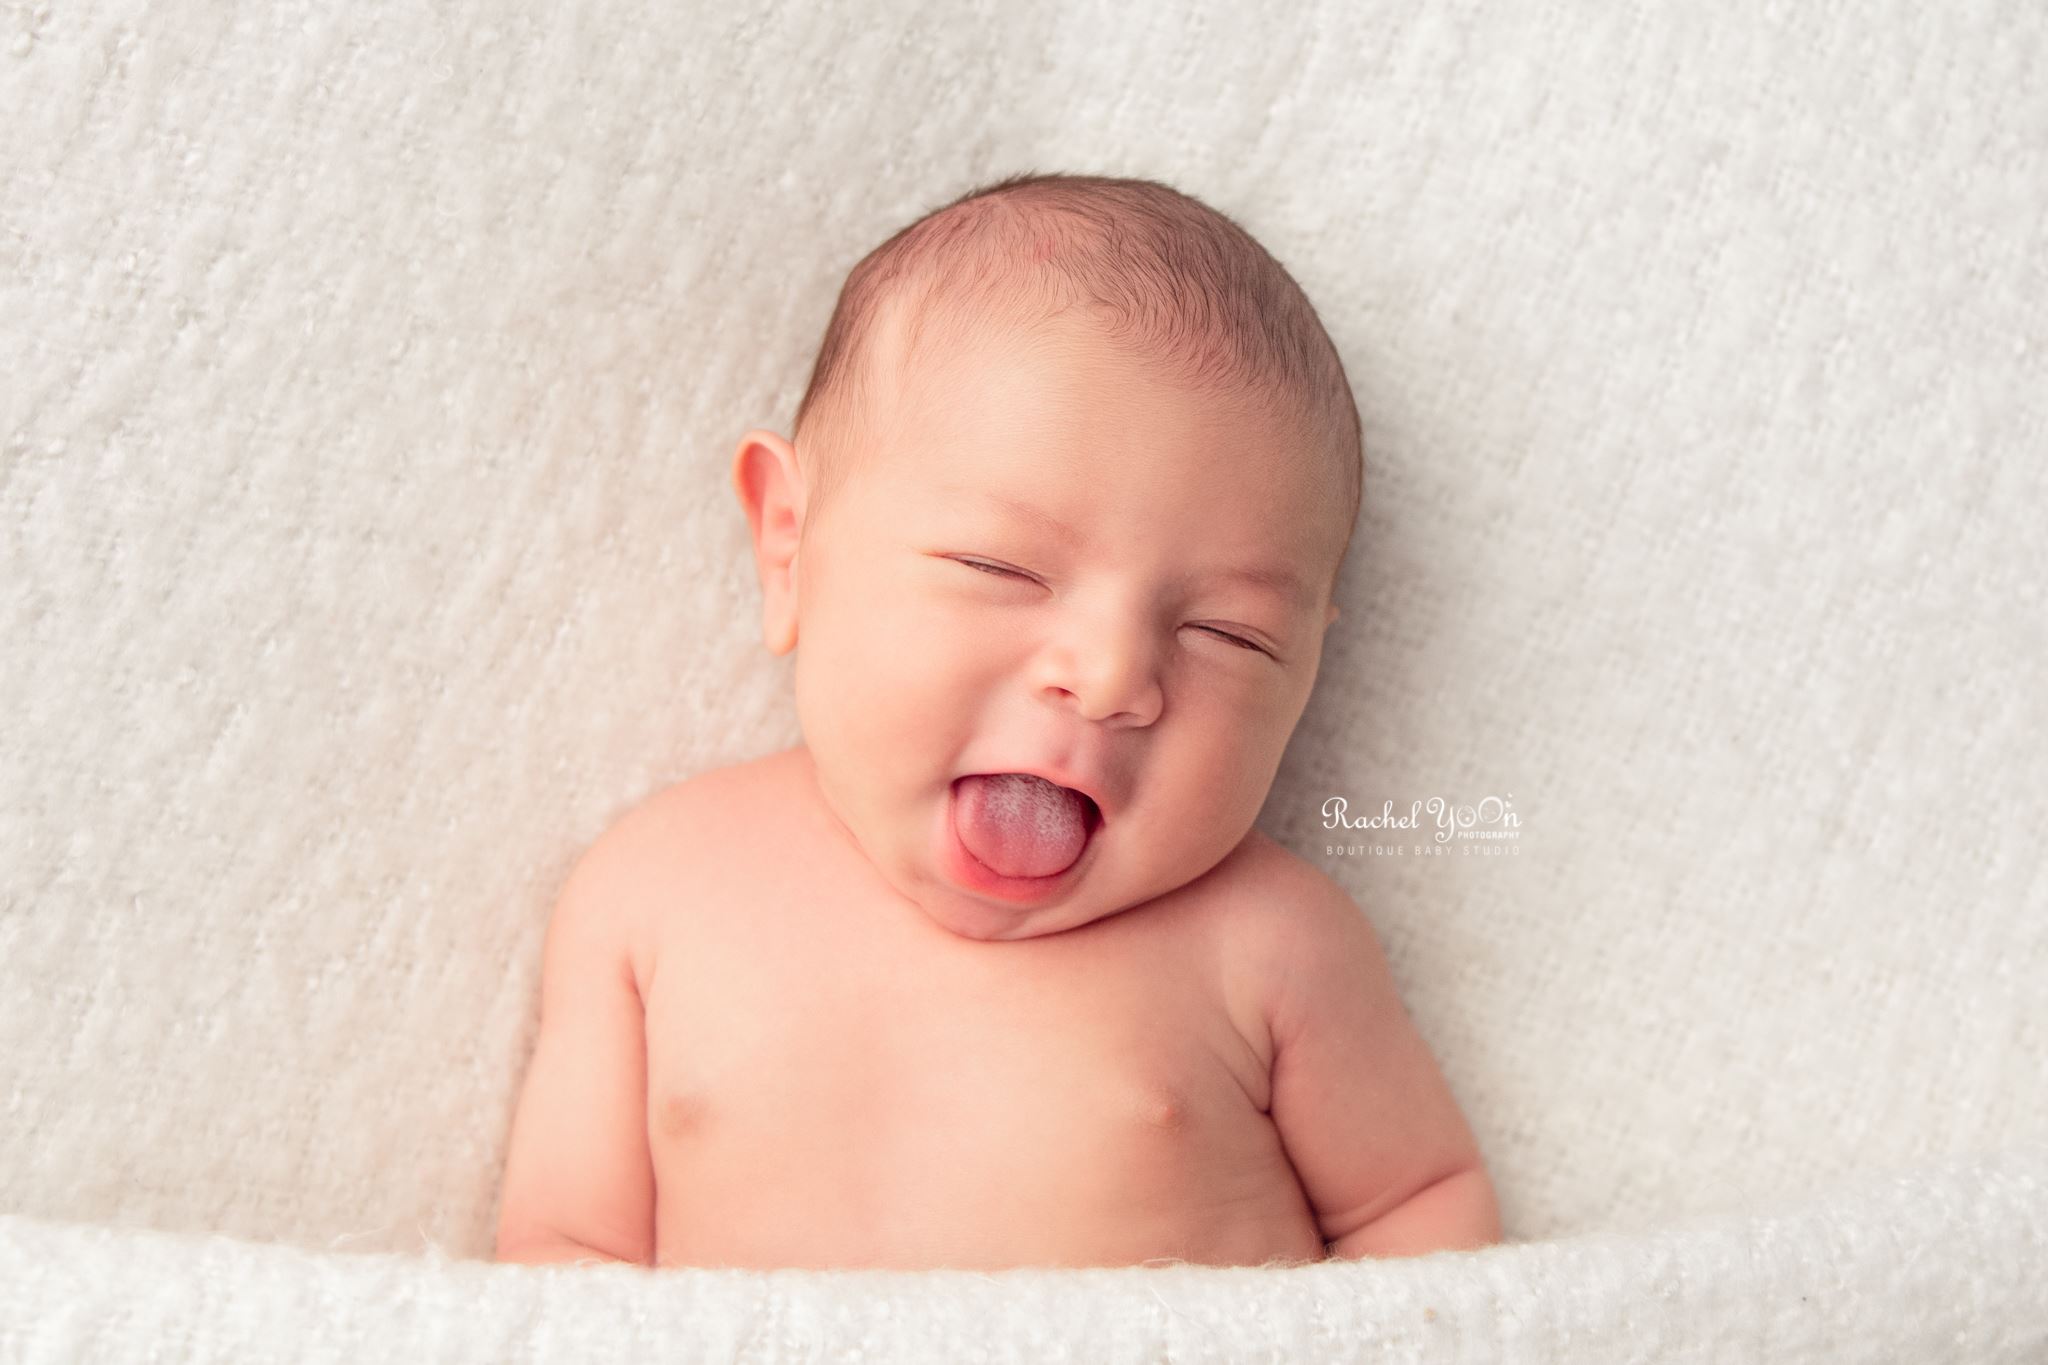 newborn photography - baby expression